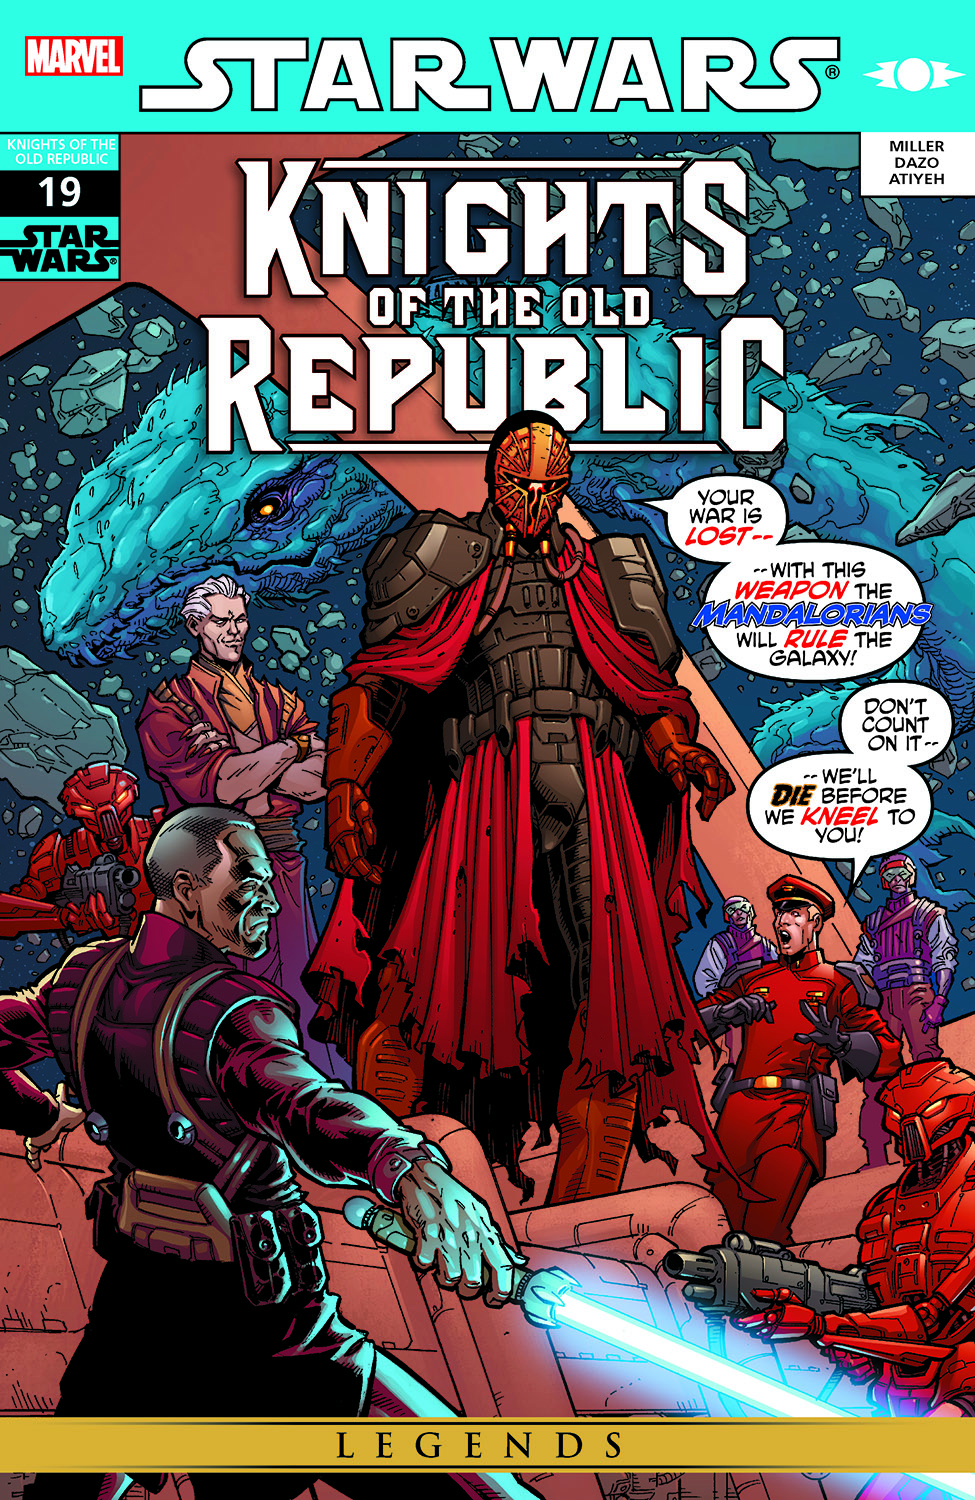 Star wars knights of the old republic comic